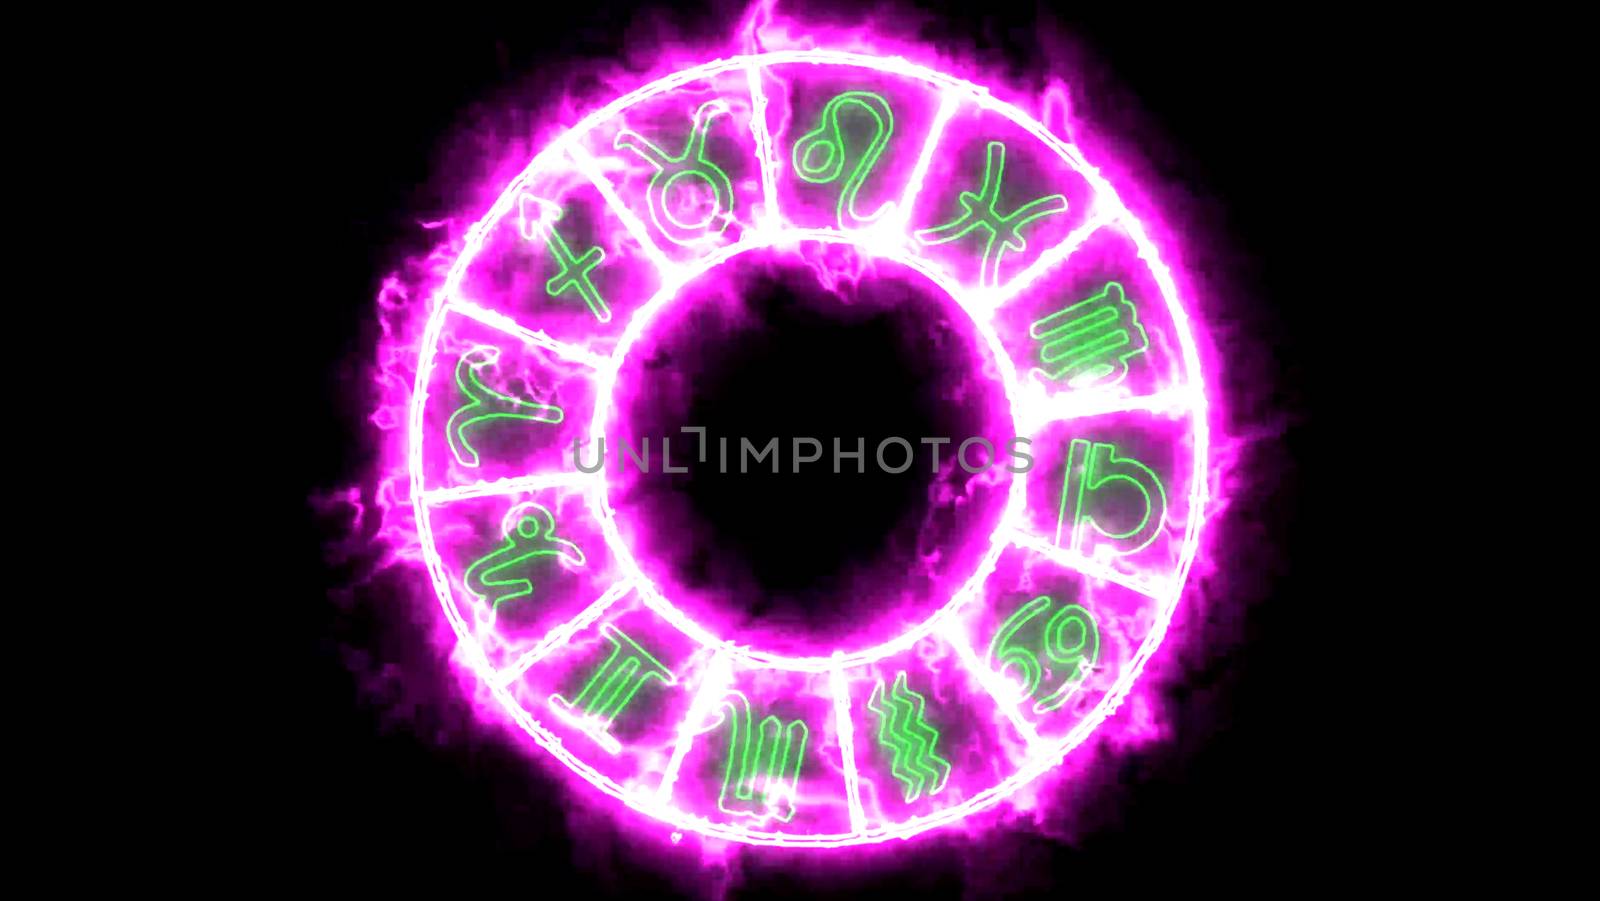 Zodiac twelve sign in the pink flame slot cycle on black screen by Darkfox